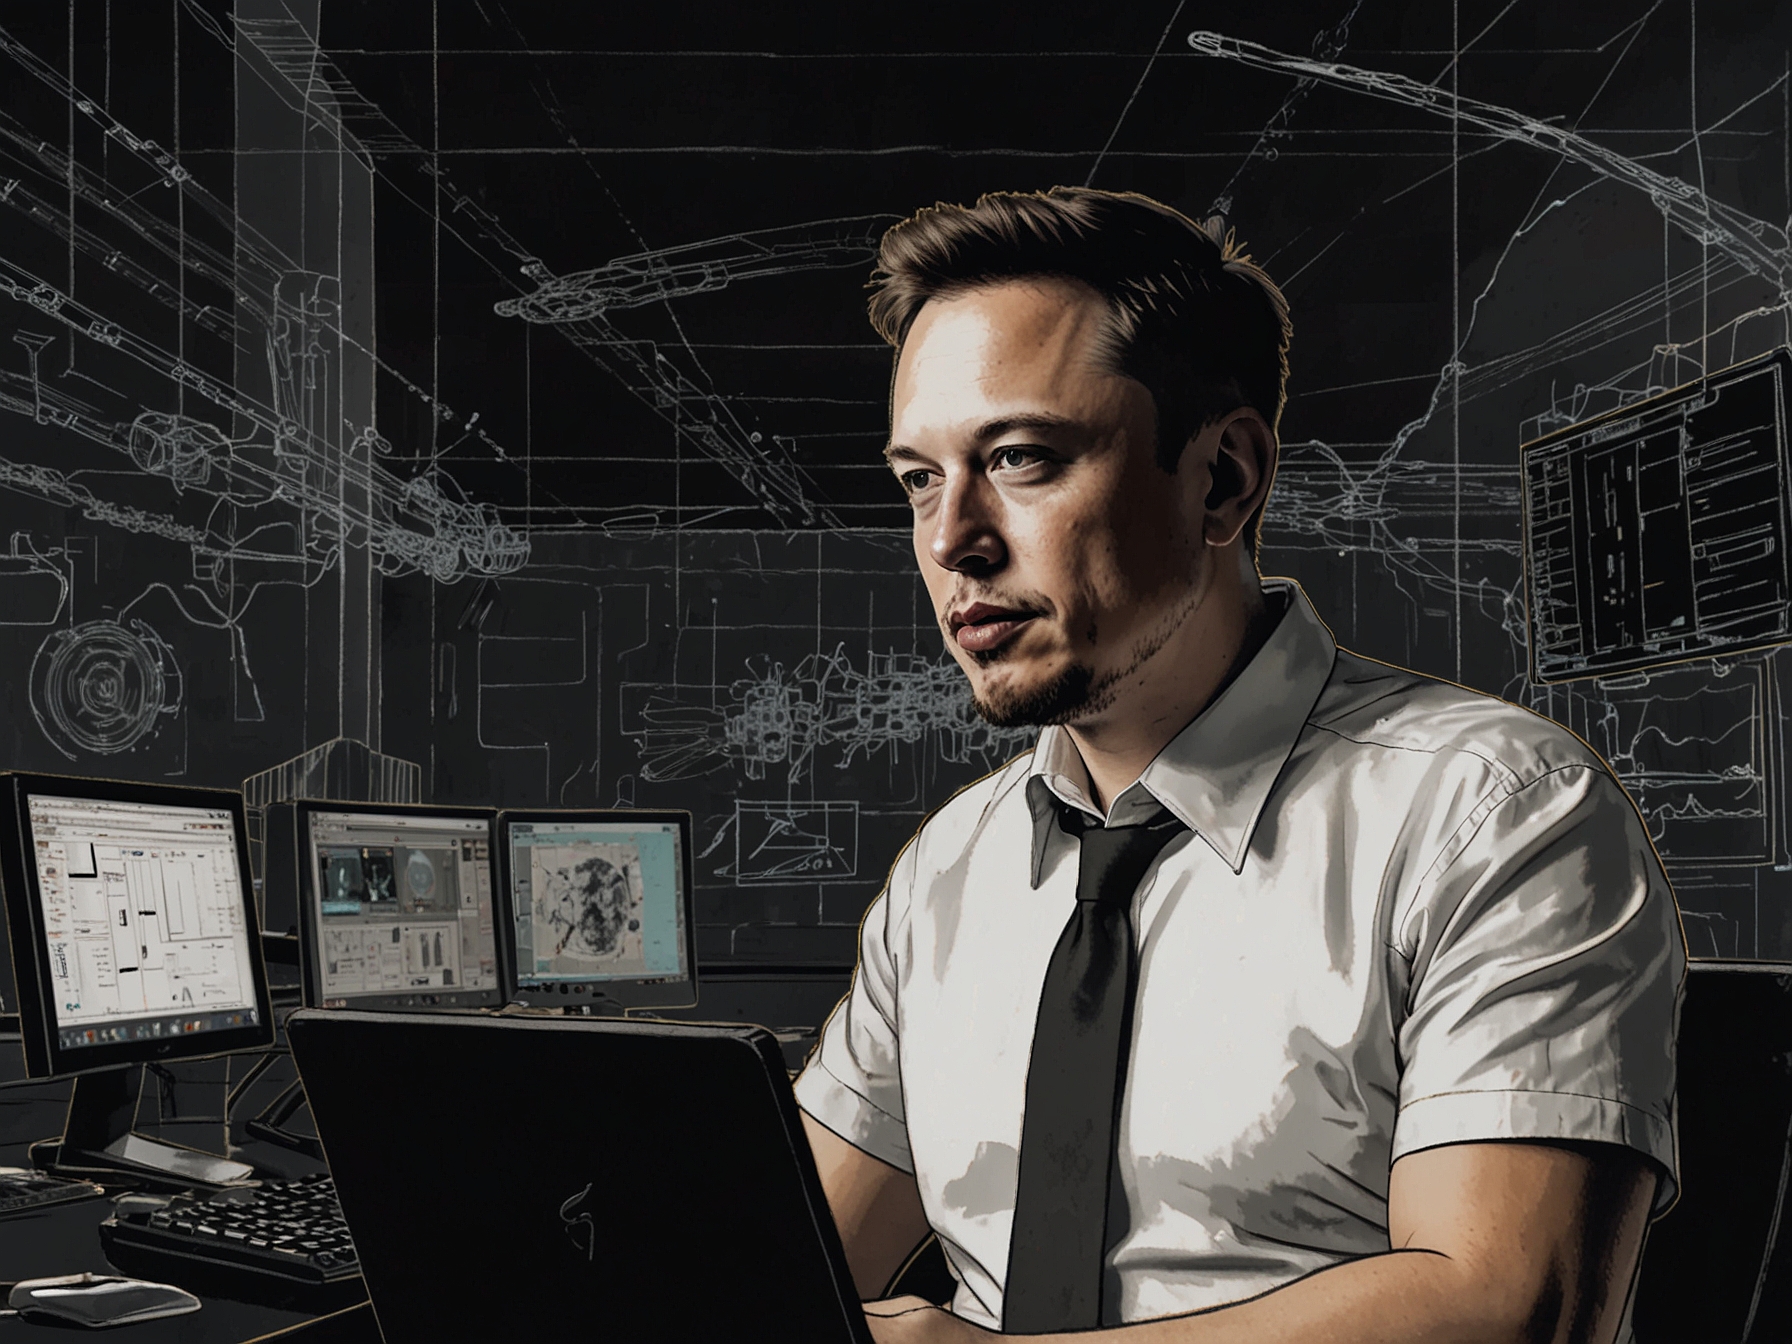 An illustration depicting Elon Musk overseeing a digital security operation, emphasizing X Corp's stringent policies against illegal content and commitment to user safety.